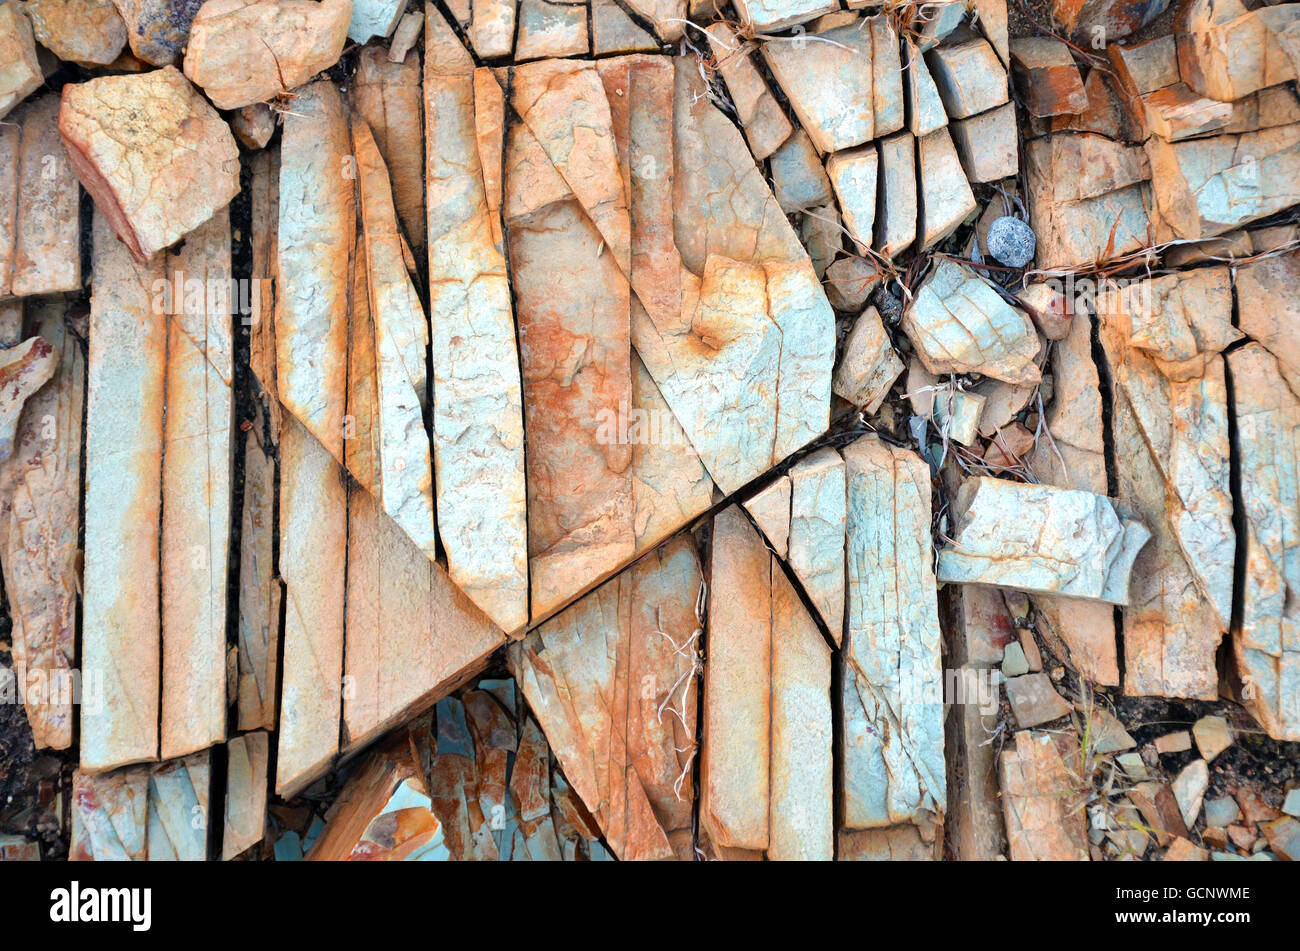 Natural abstract patterns and textures in fractured rock Stock Photo